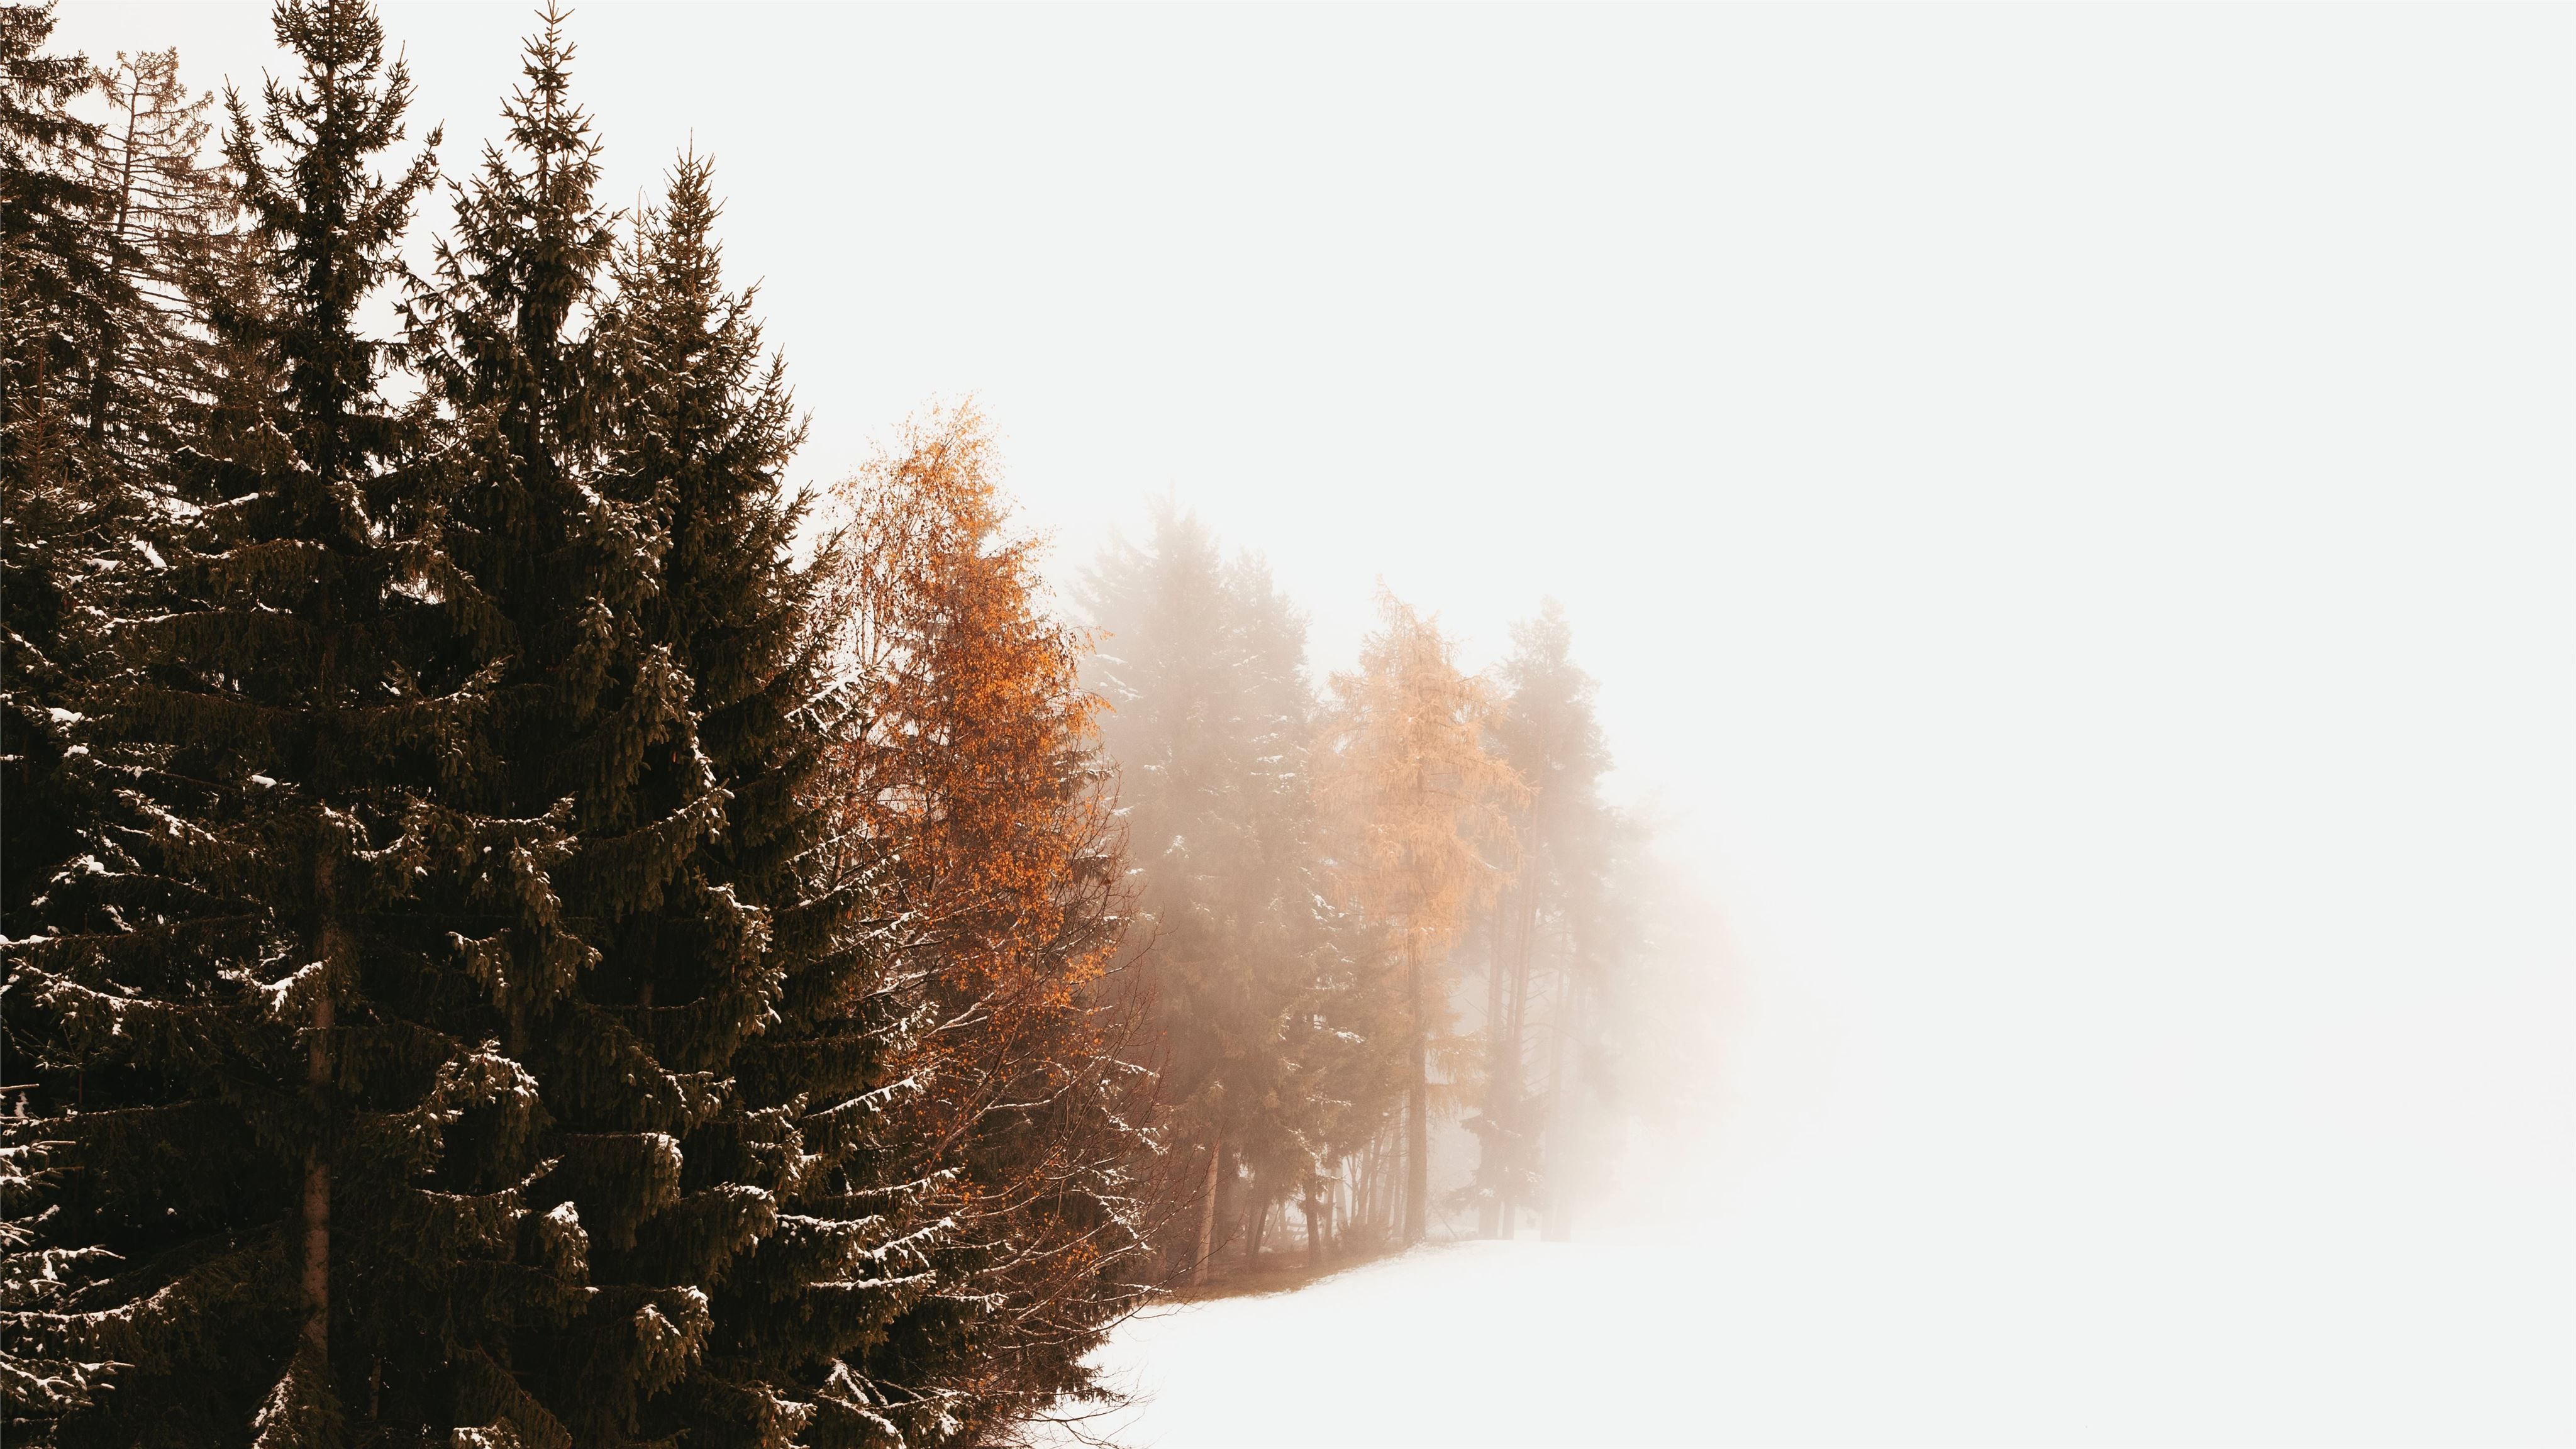 green Evergreen trees in a white snowfield MacBook Air Wallpaper Download